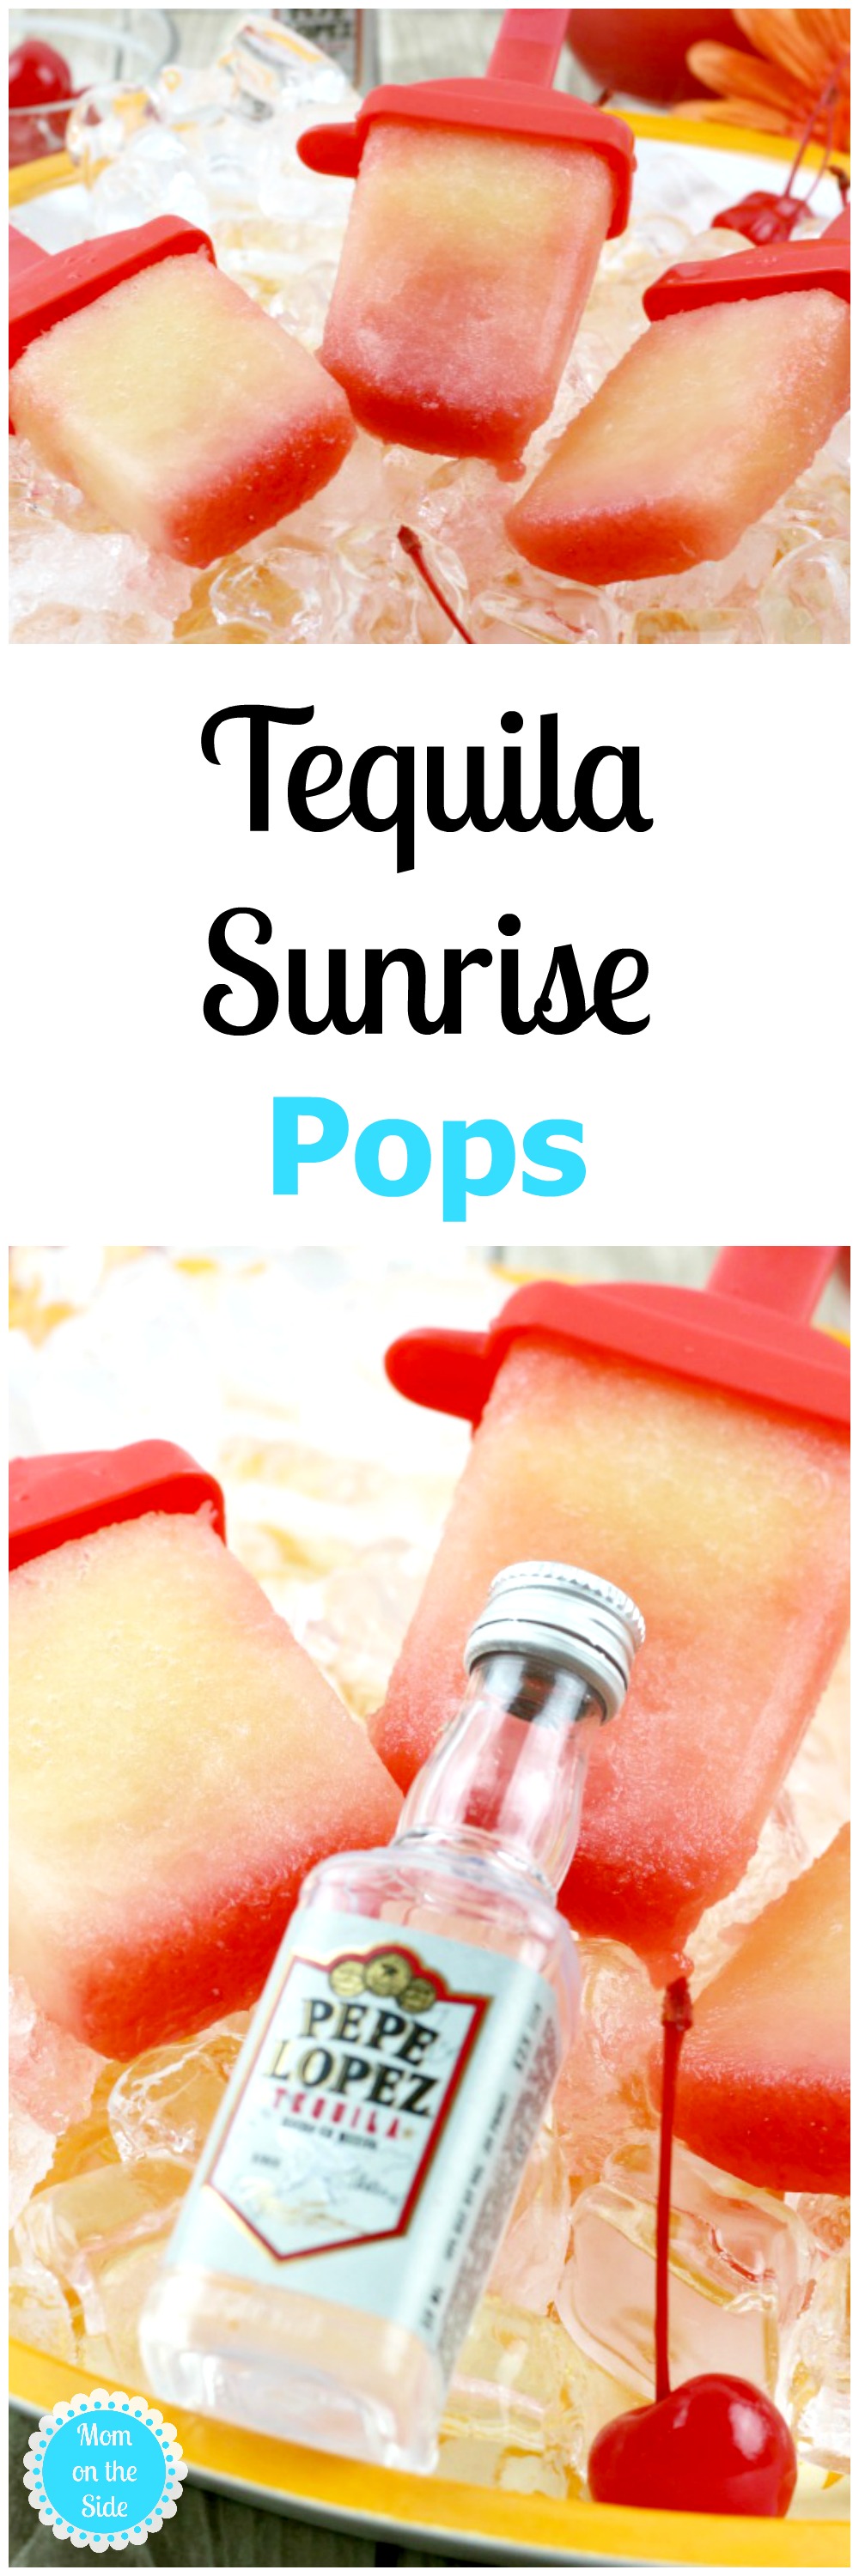 These delicious Tequila Sunrise Pops have summer written all over them. Check out this week's Thirsty Thursday recipe